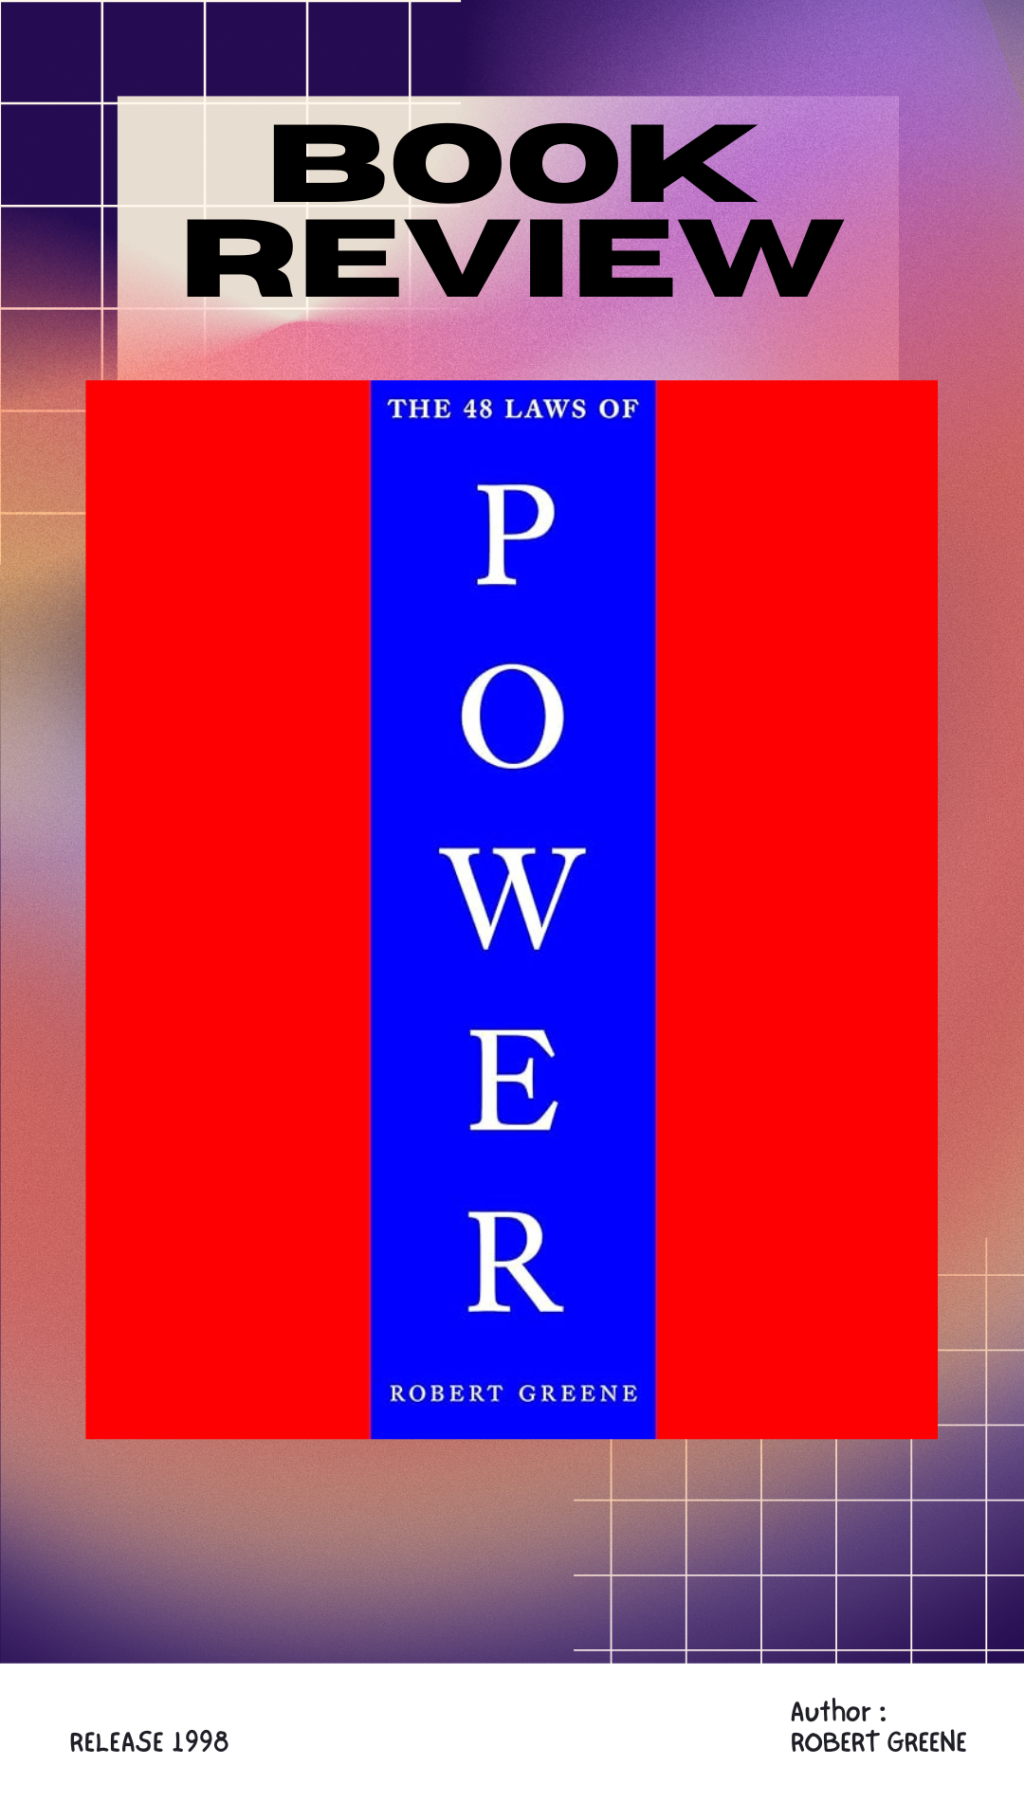 The 48 Laws of Power